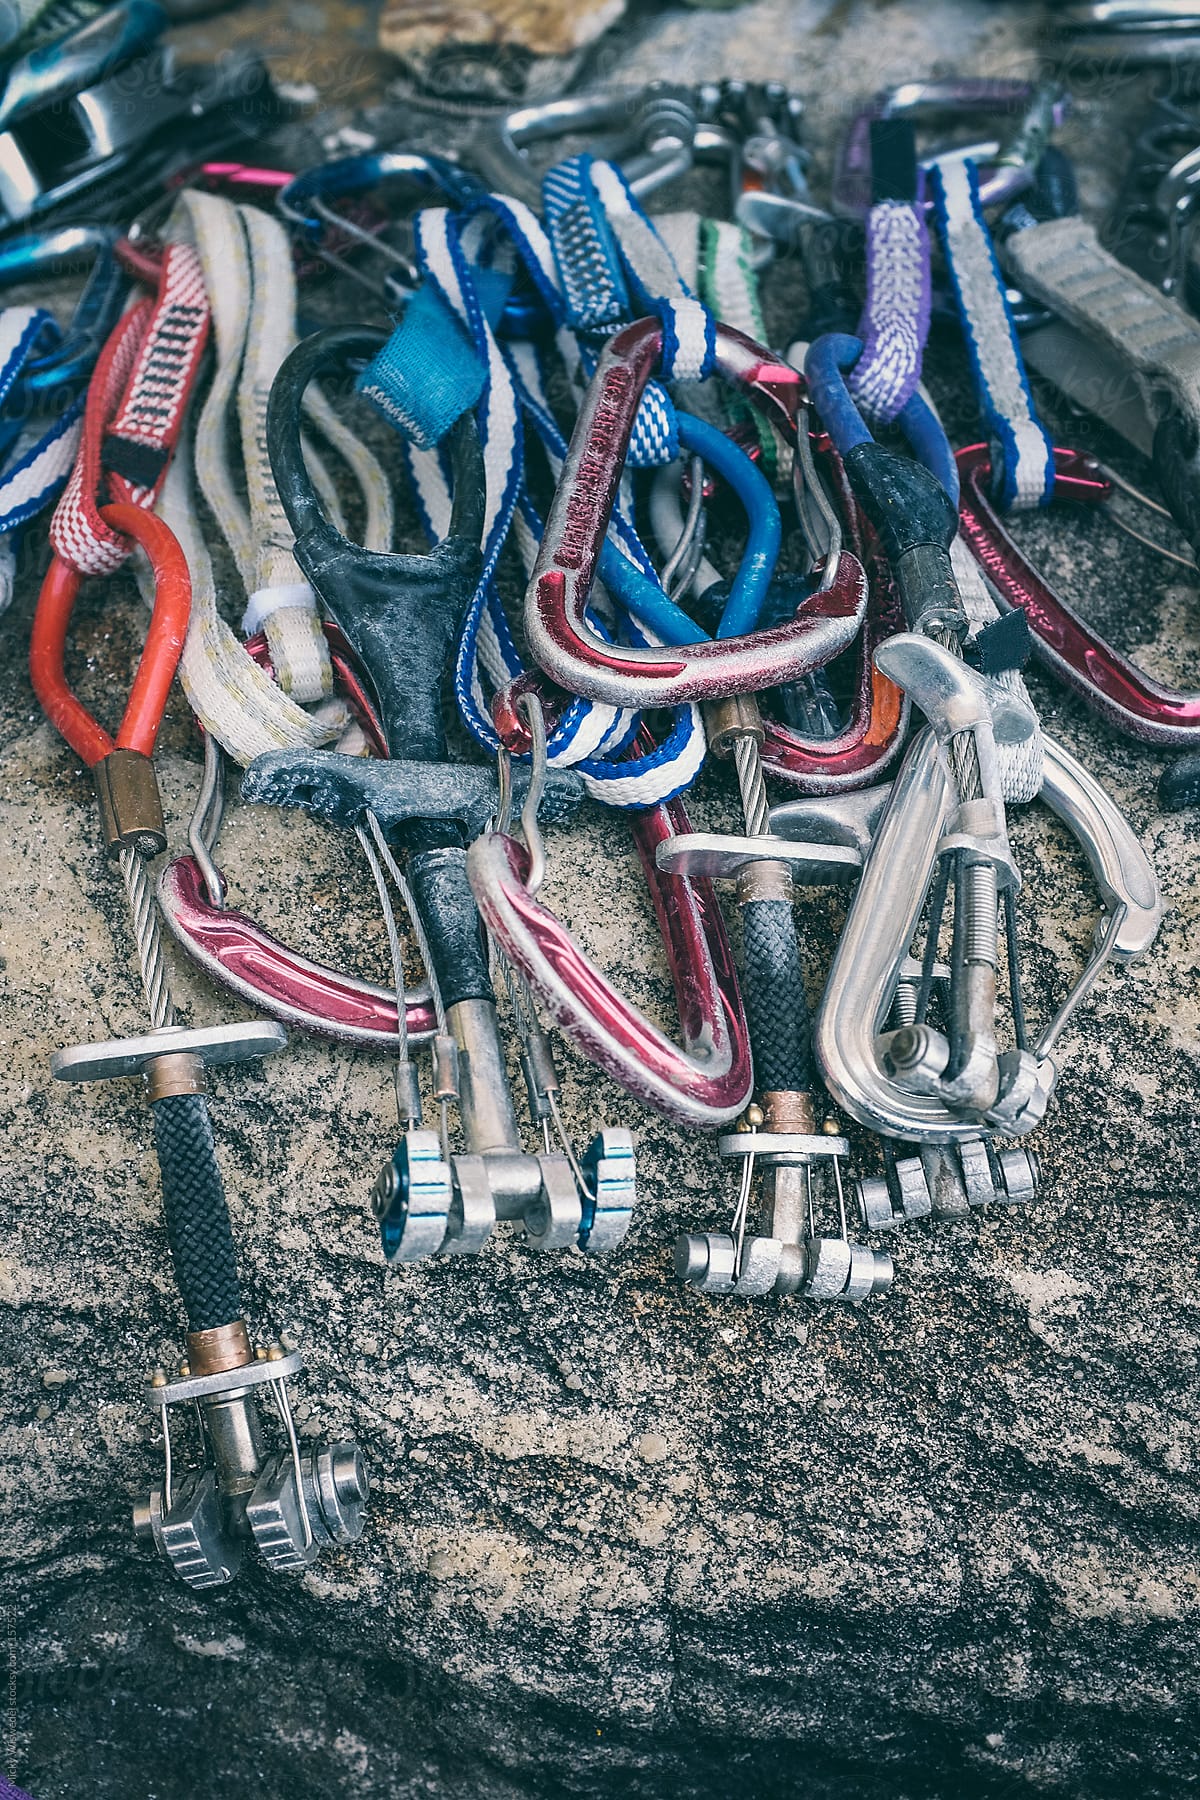 Rock climbing gear, cams used for protecting a climbers fall